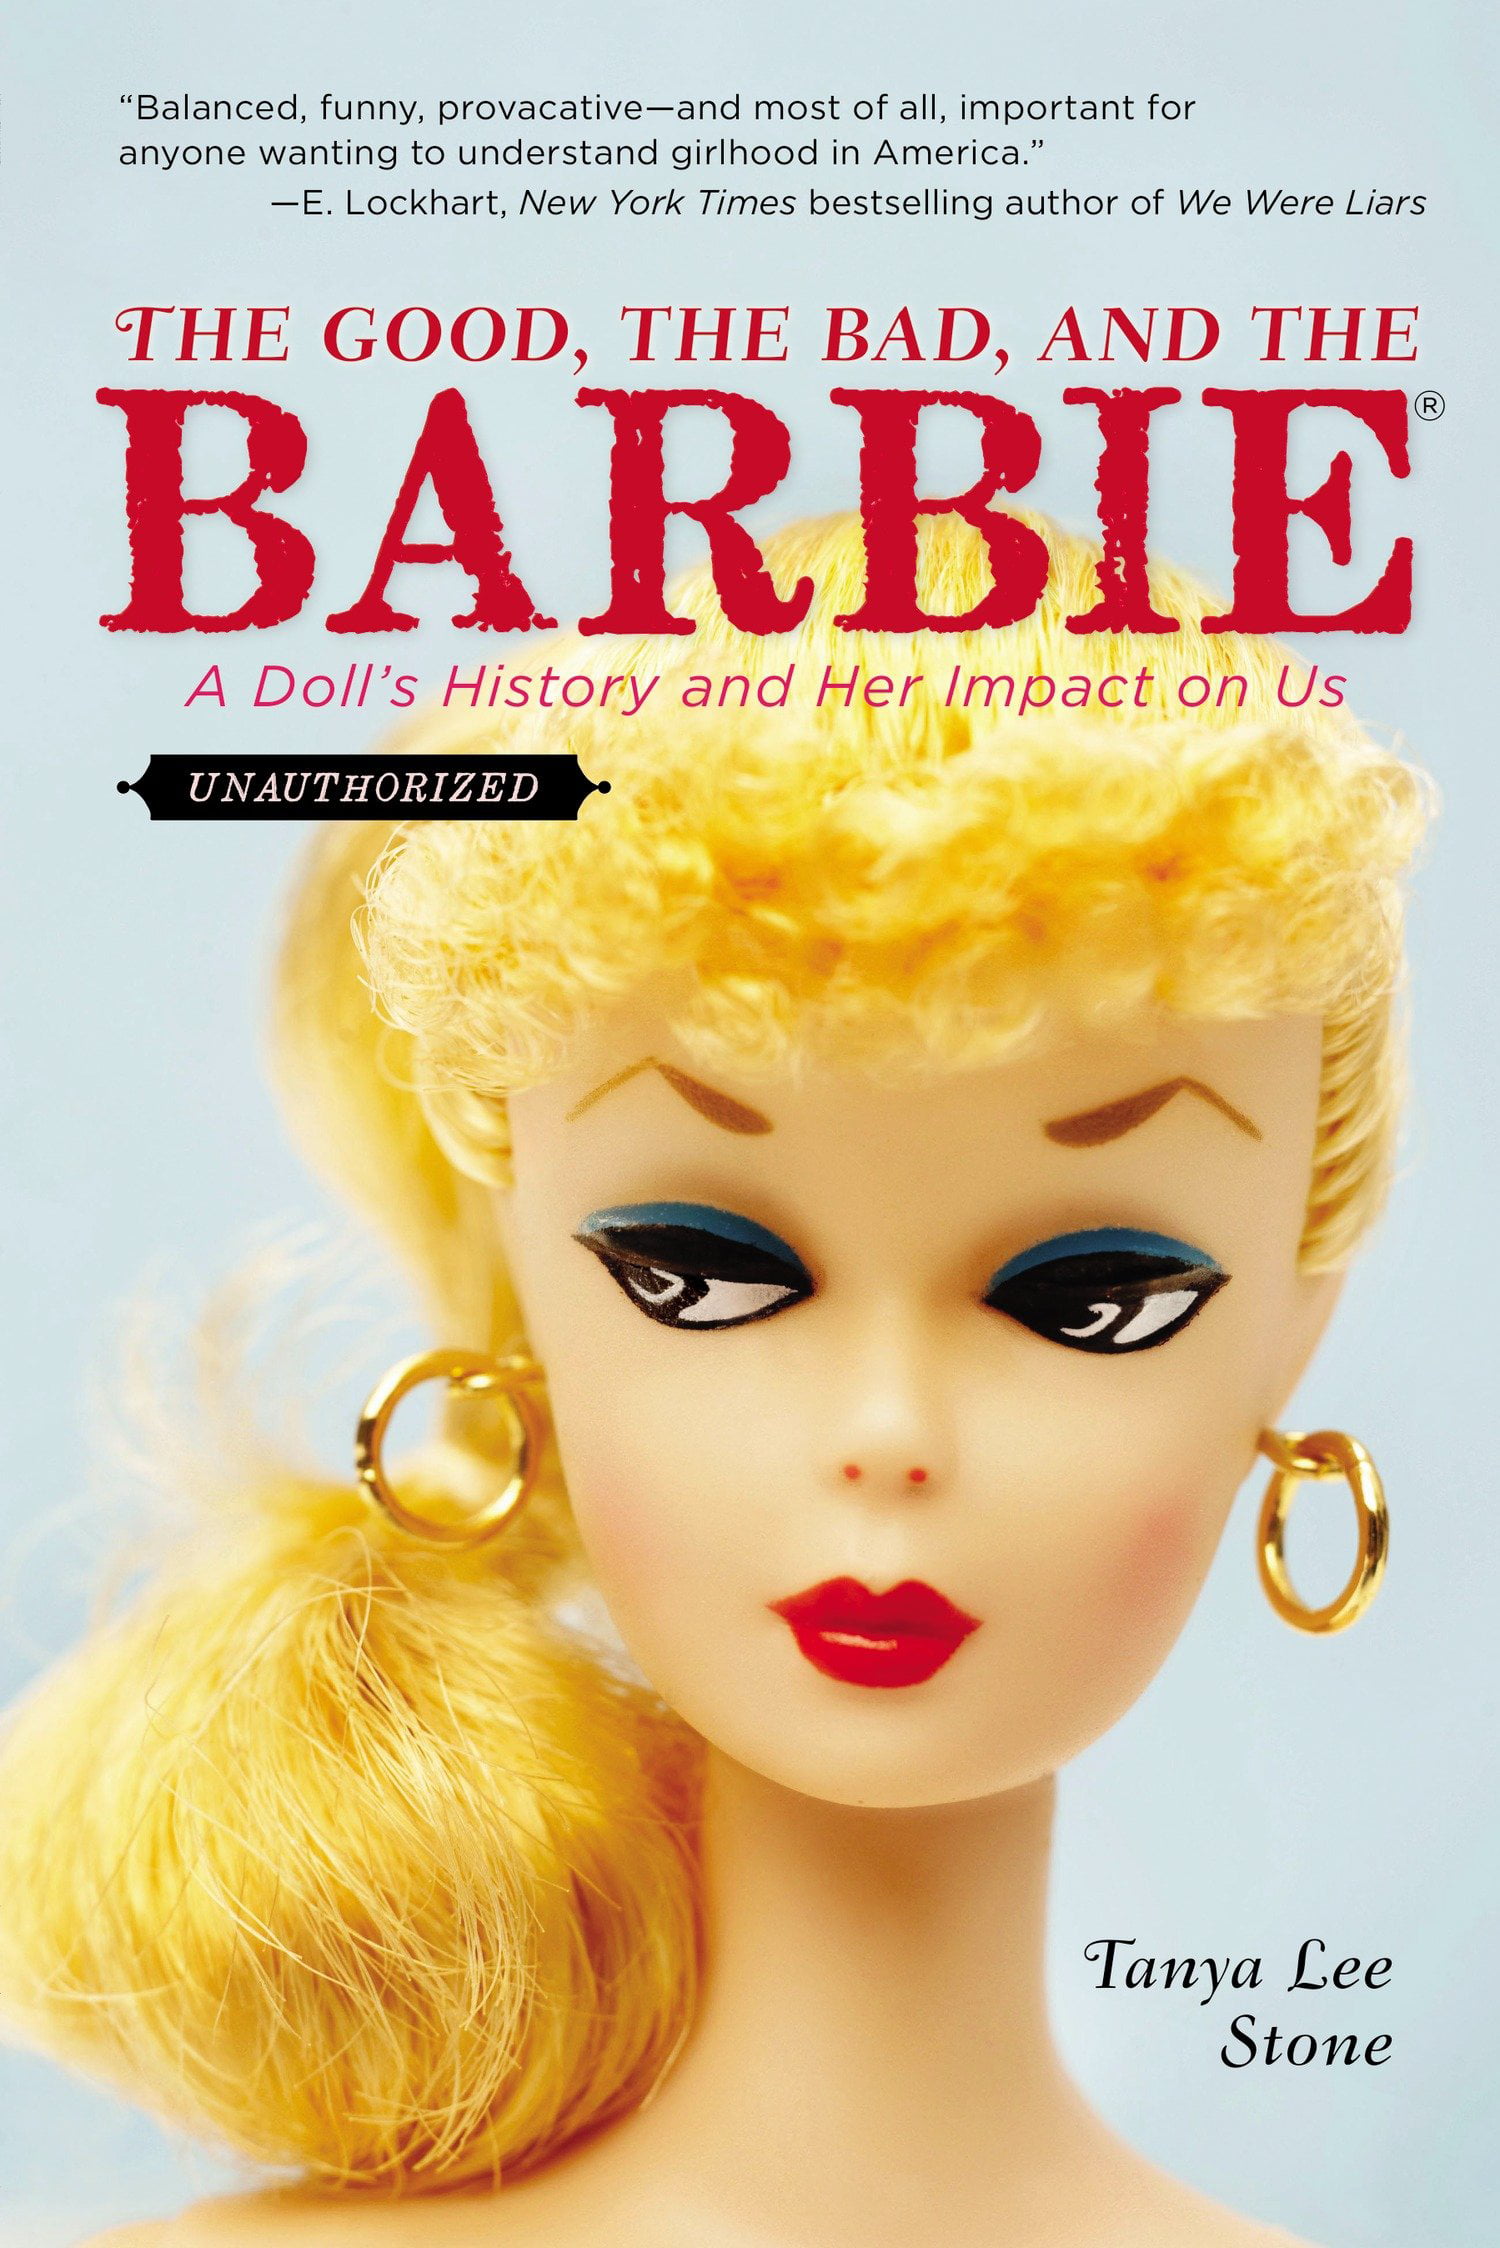 The Good, the Bad, and the Barbie A Doll's History and Her Impact on